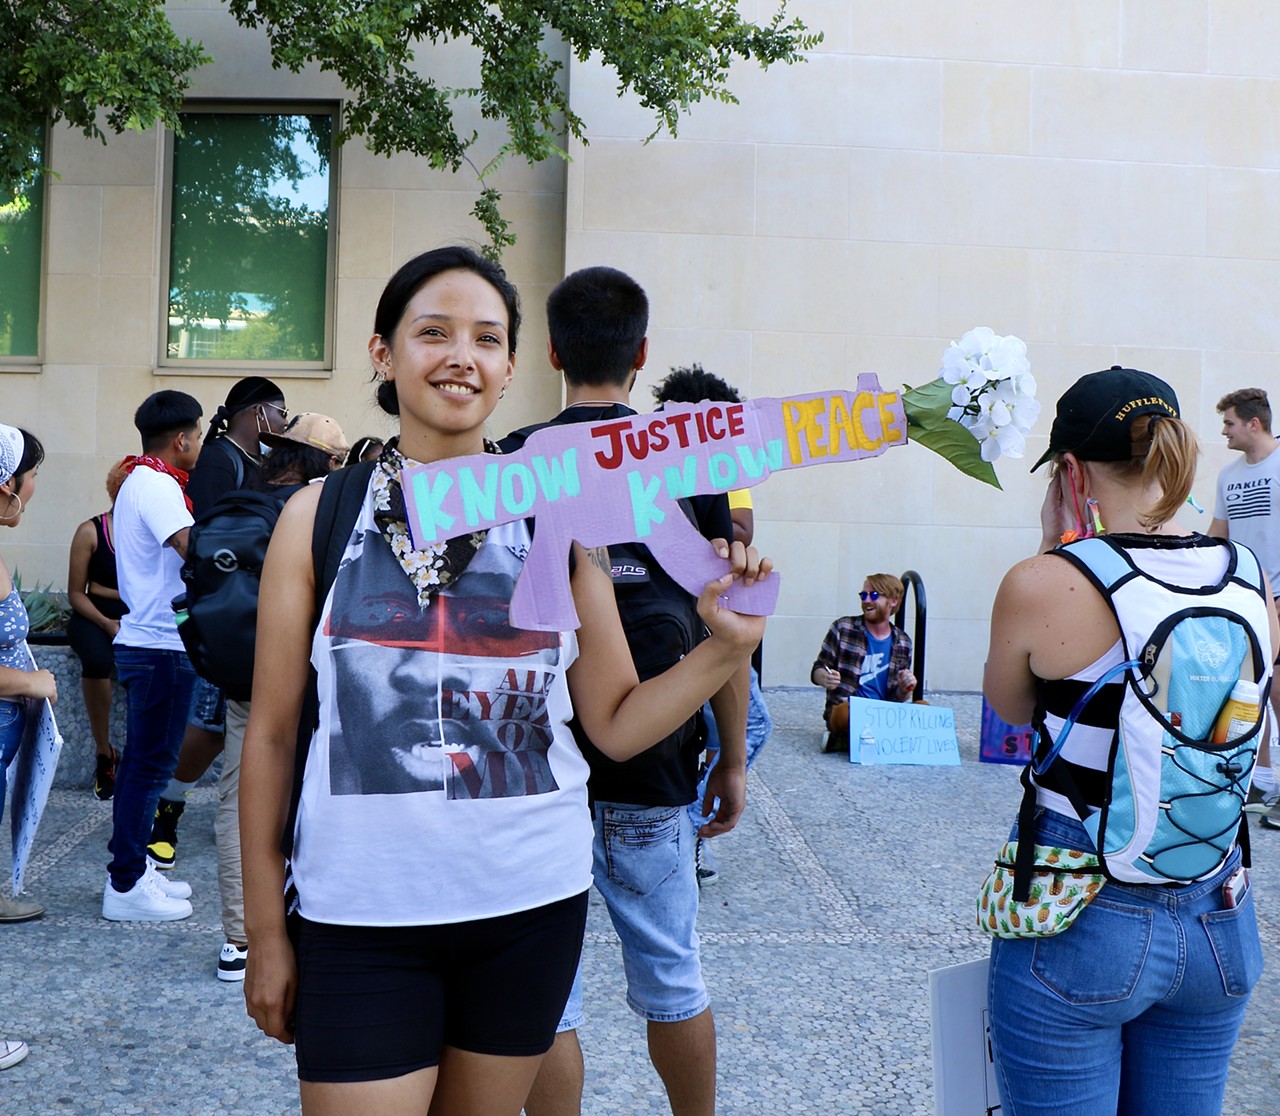 Powerful Signs Carried During San Antonio's Black Lives Matter Protests